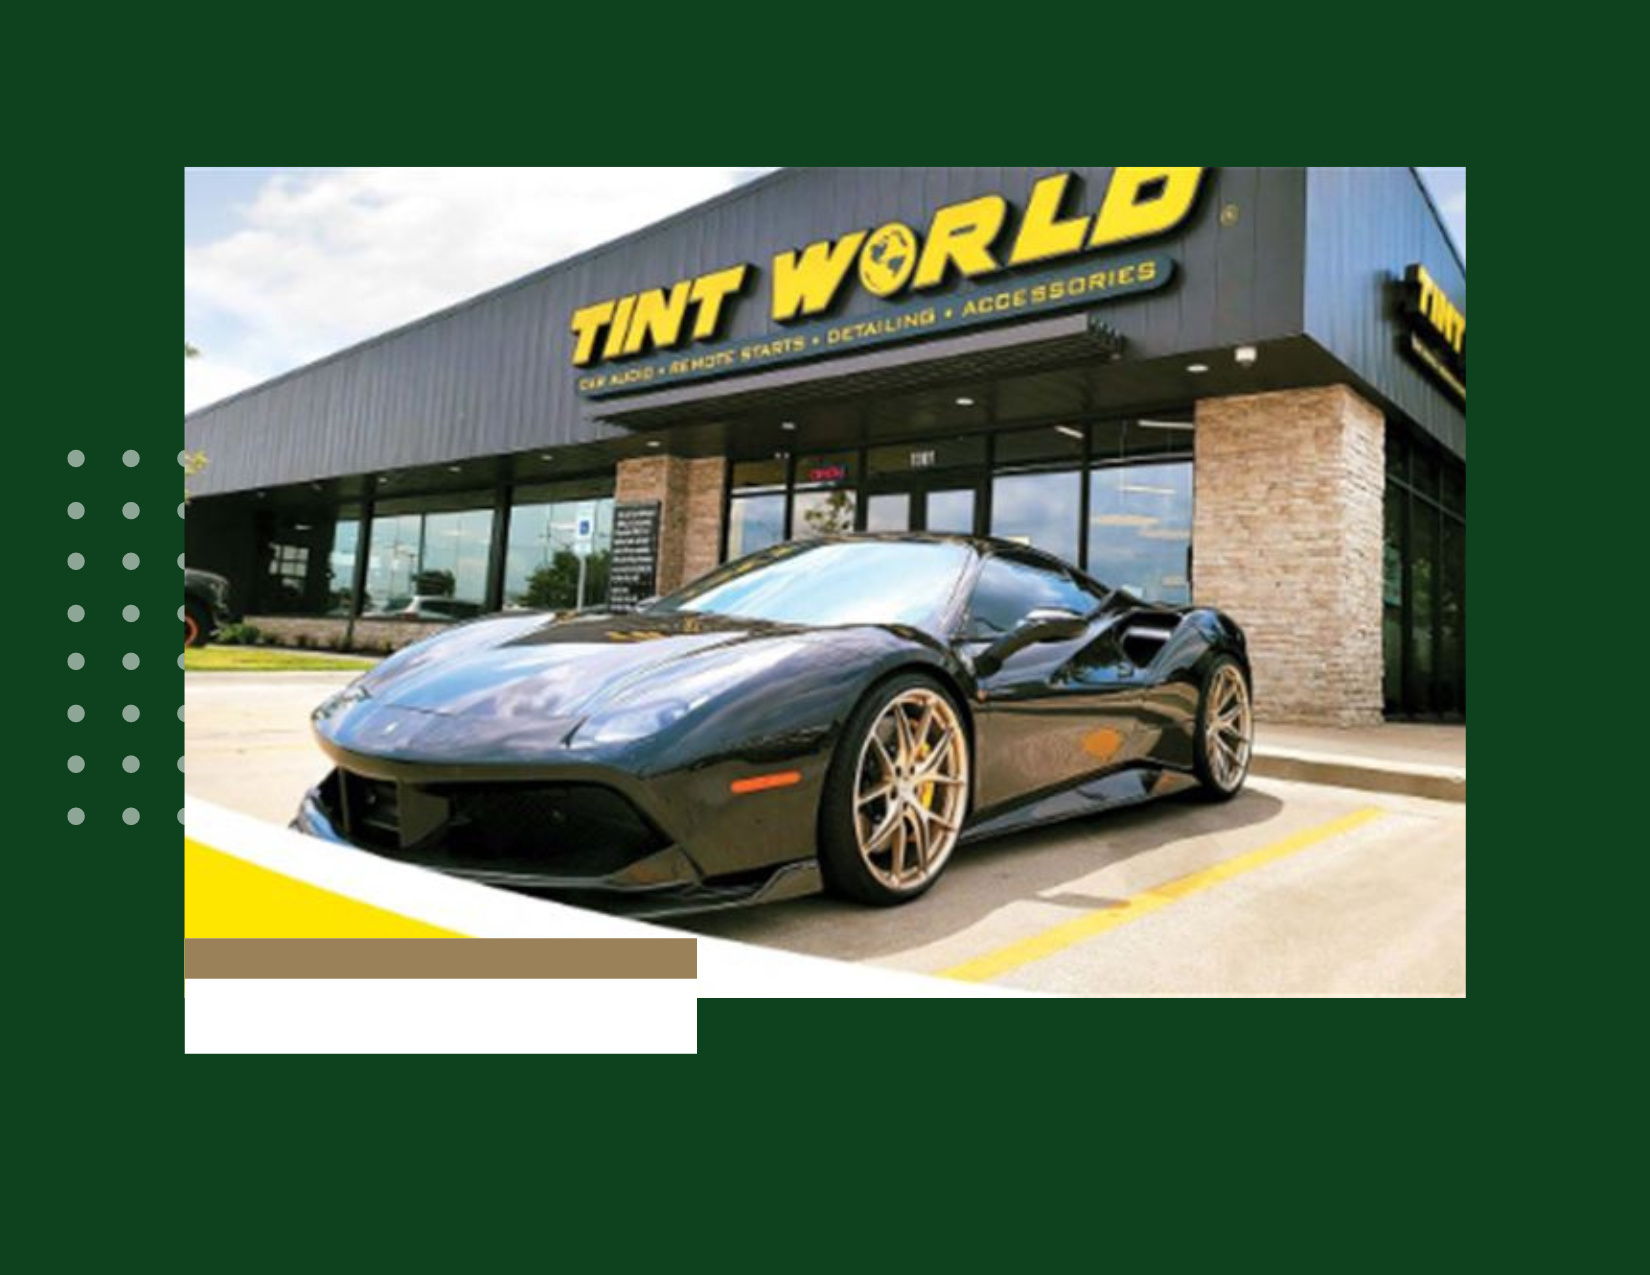 Existing Tint World For Sale - Auto & Marine Styling Center